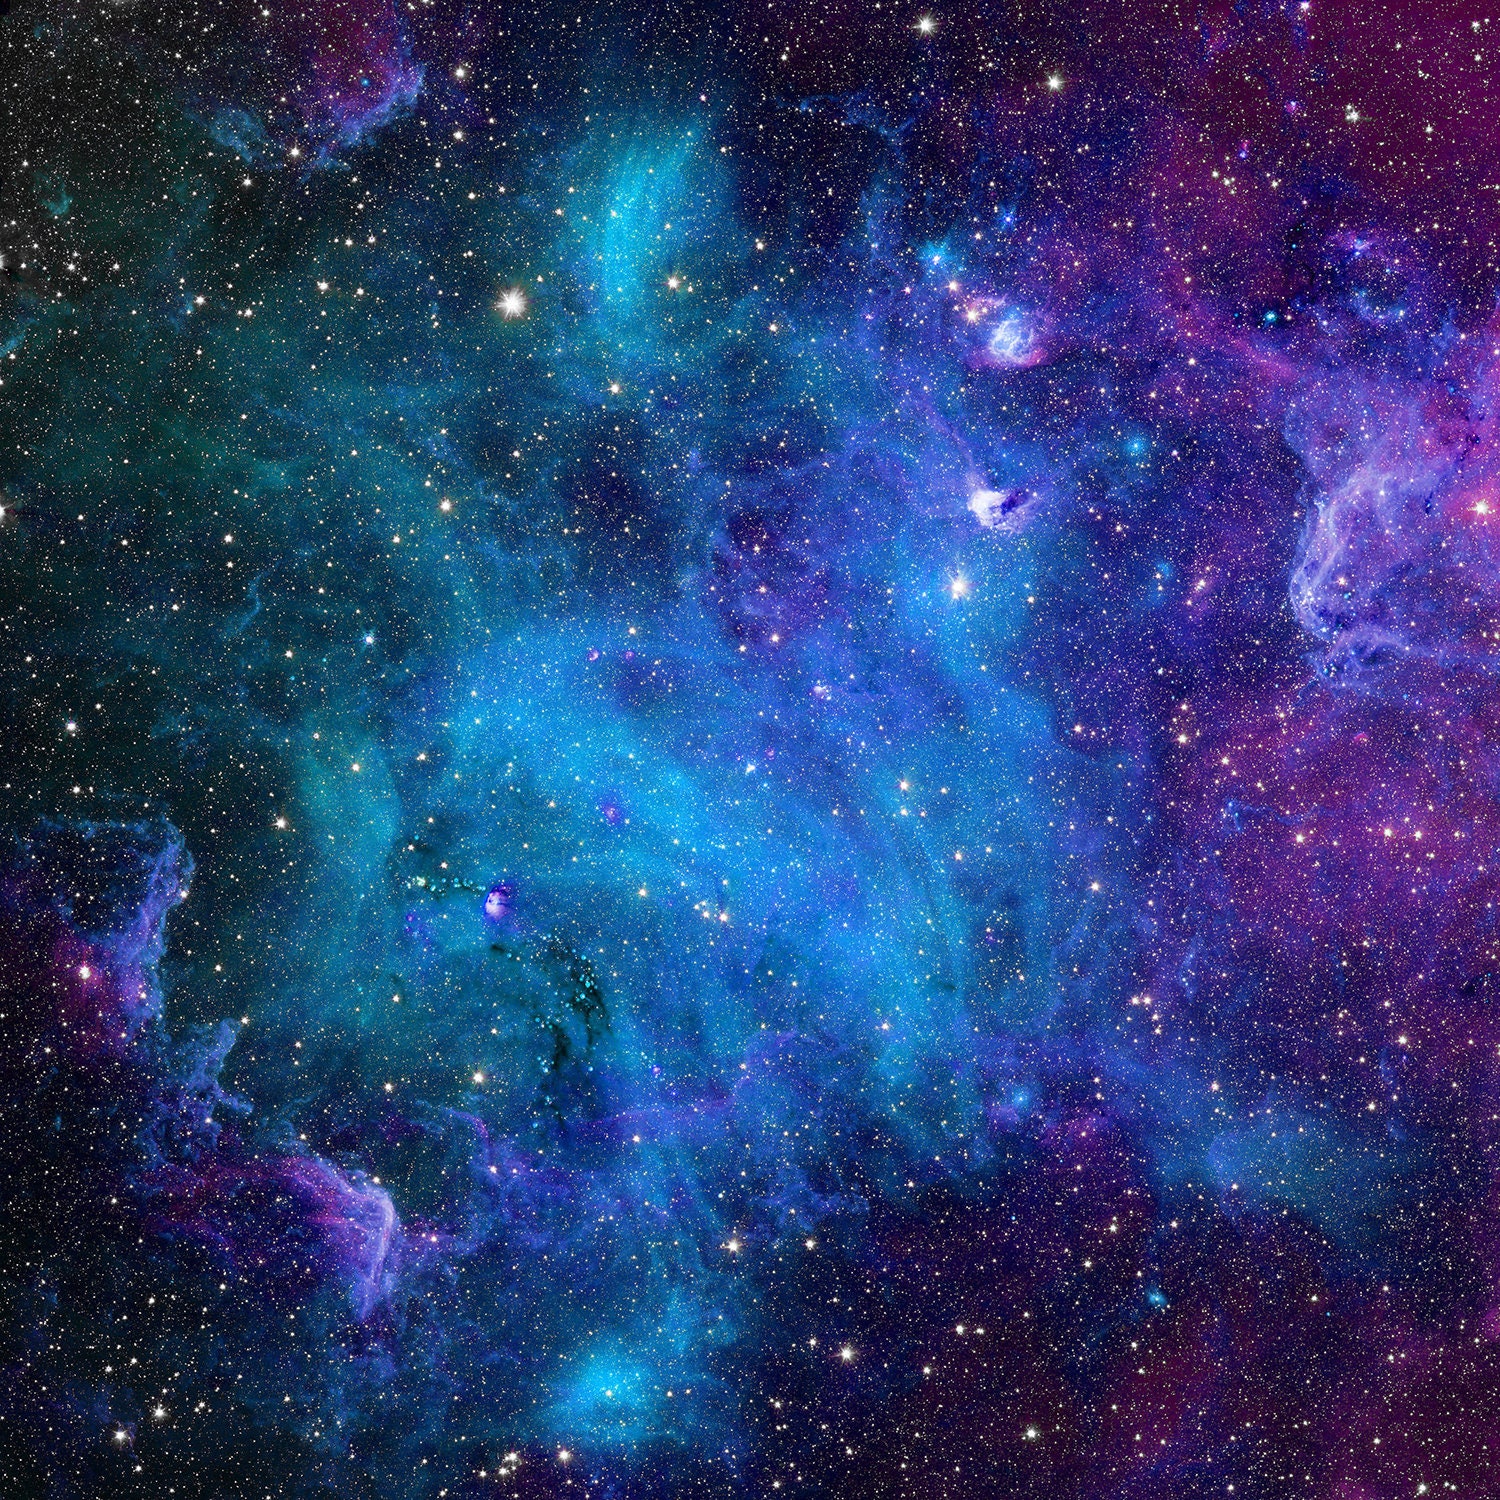 FUERMOR Background 7x5ft Space Explosion Photography Backdrop Galaxy Wars Event Studio Photo Props GYFU146